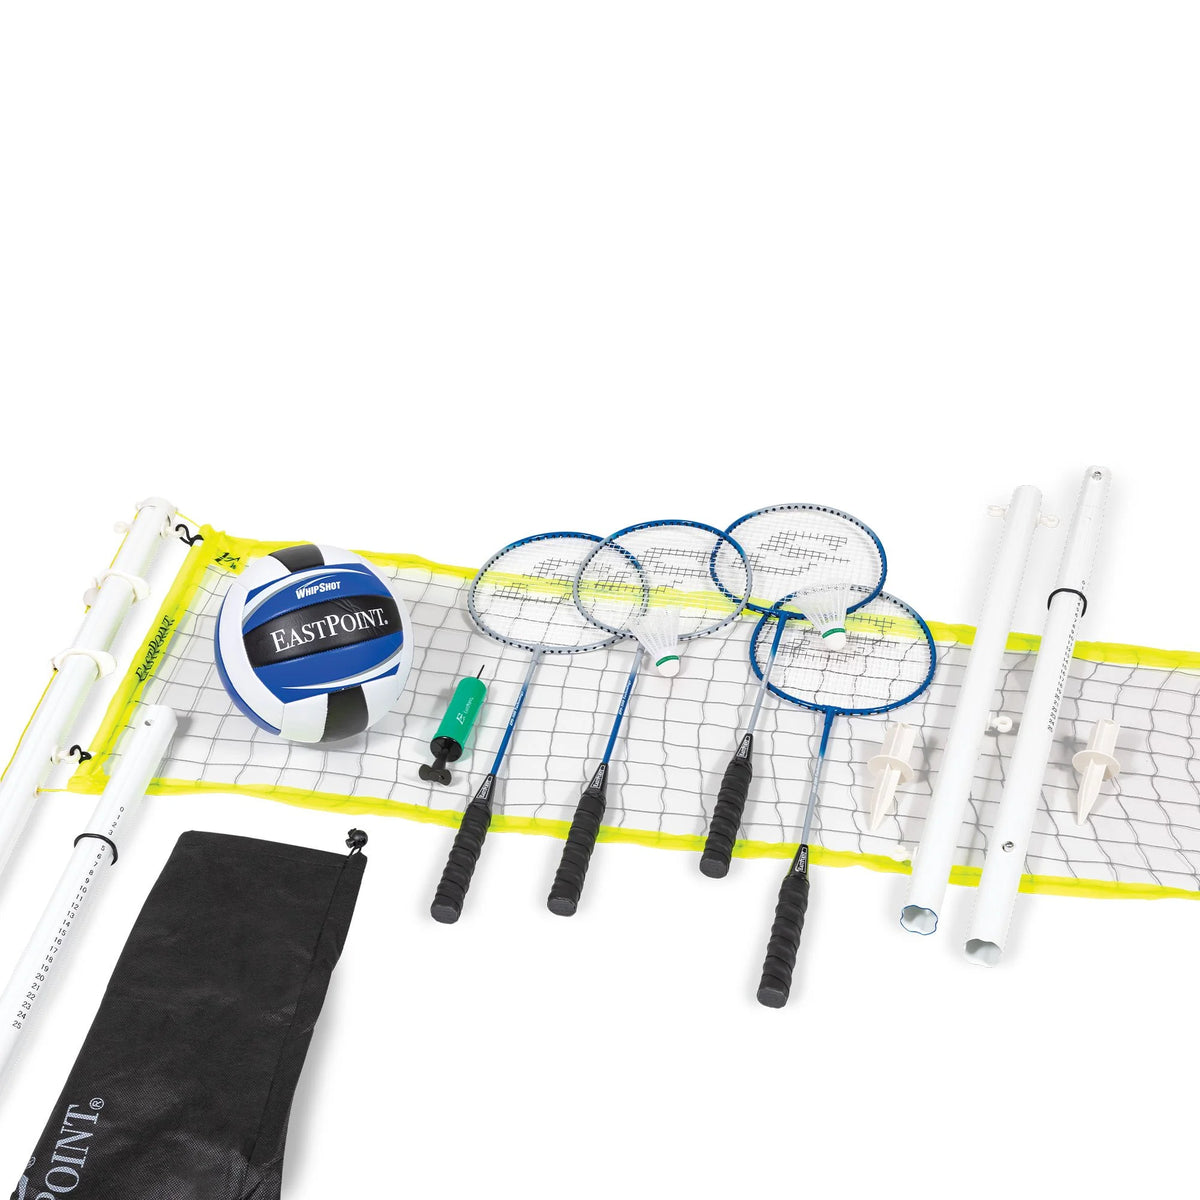 2-in-1 Volleyball and Badminton Set with Adjustable Net